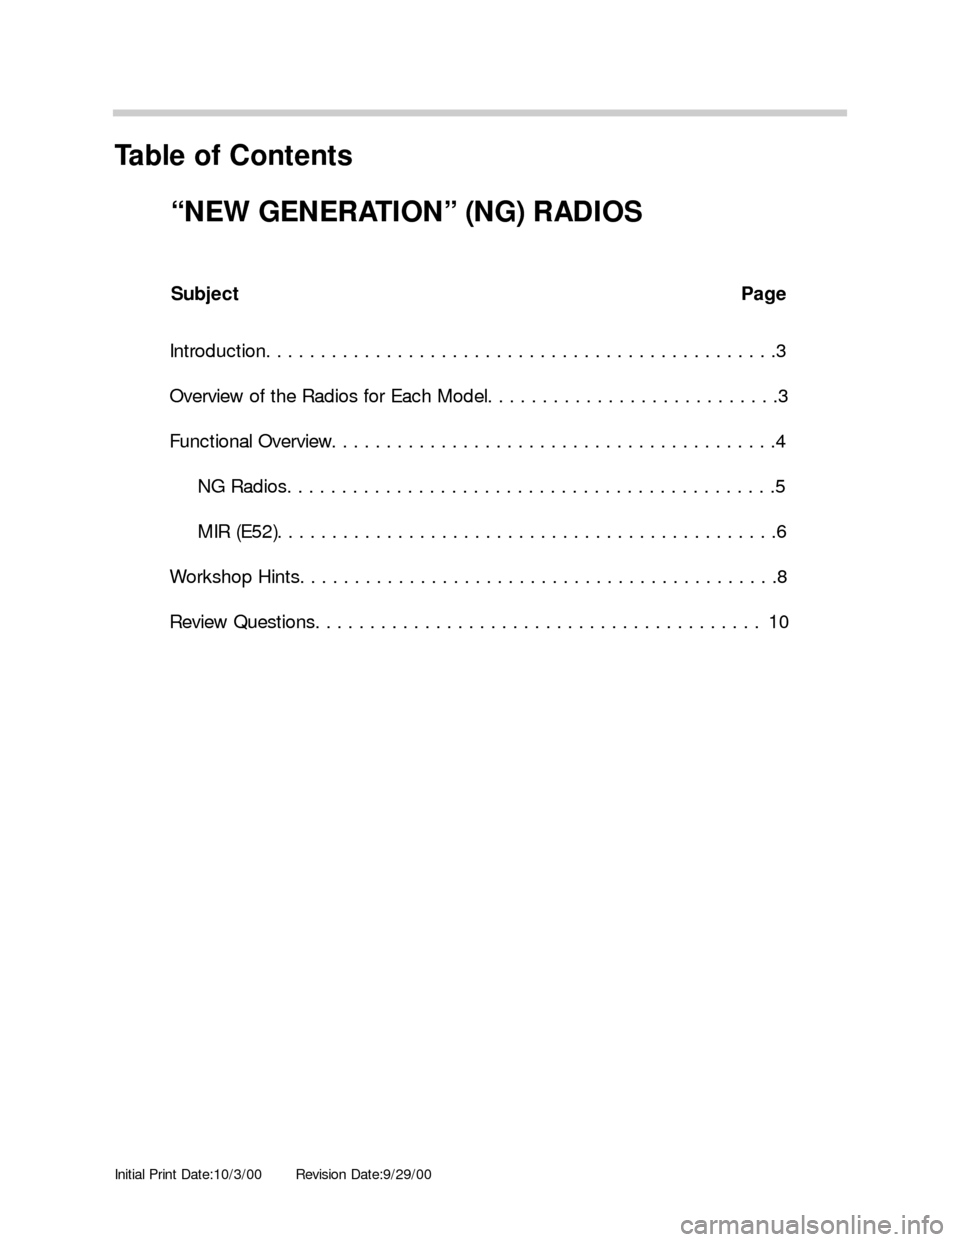 BMW 3 SERIES 2005 E46 New Generation Radios Manual Initial Print Date:10/3/00Revision Date:9/29/00
Subject Page
Introduction. . . . . . . . . . . . . . . . . . . . . . . . . . . . . . . . . . . . . . . . . . . . . . .3
Overview of the Radios for Each 